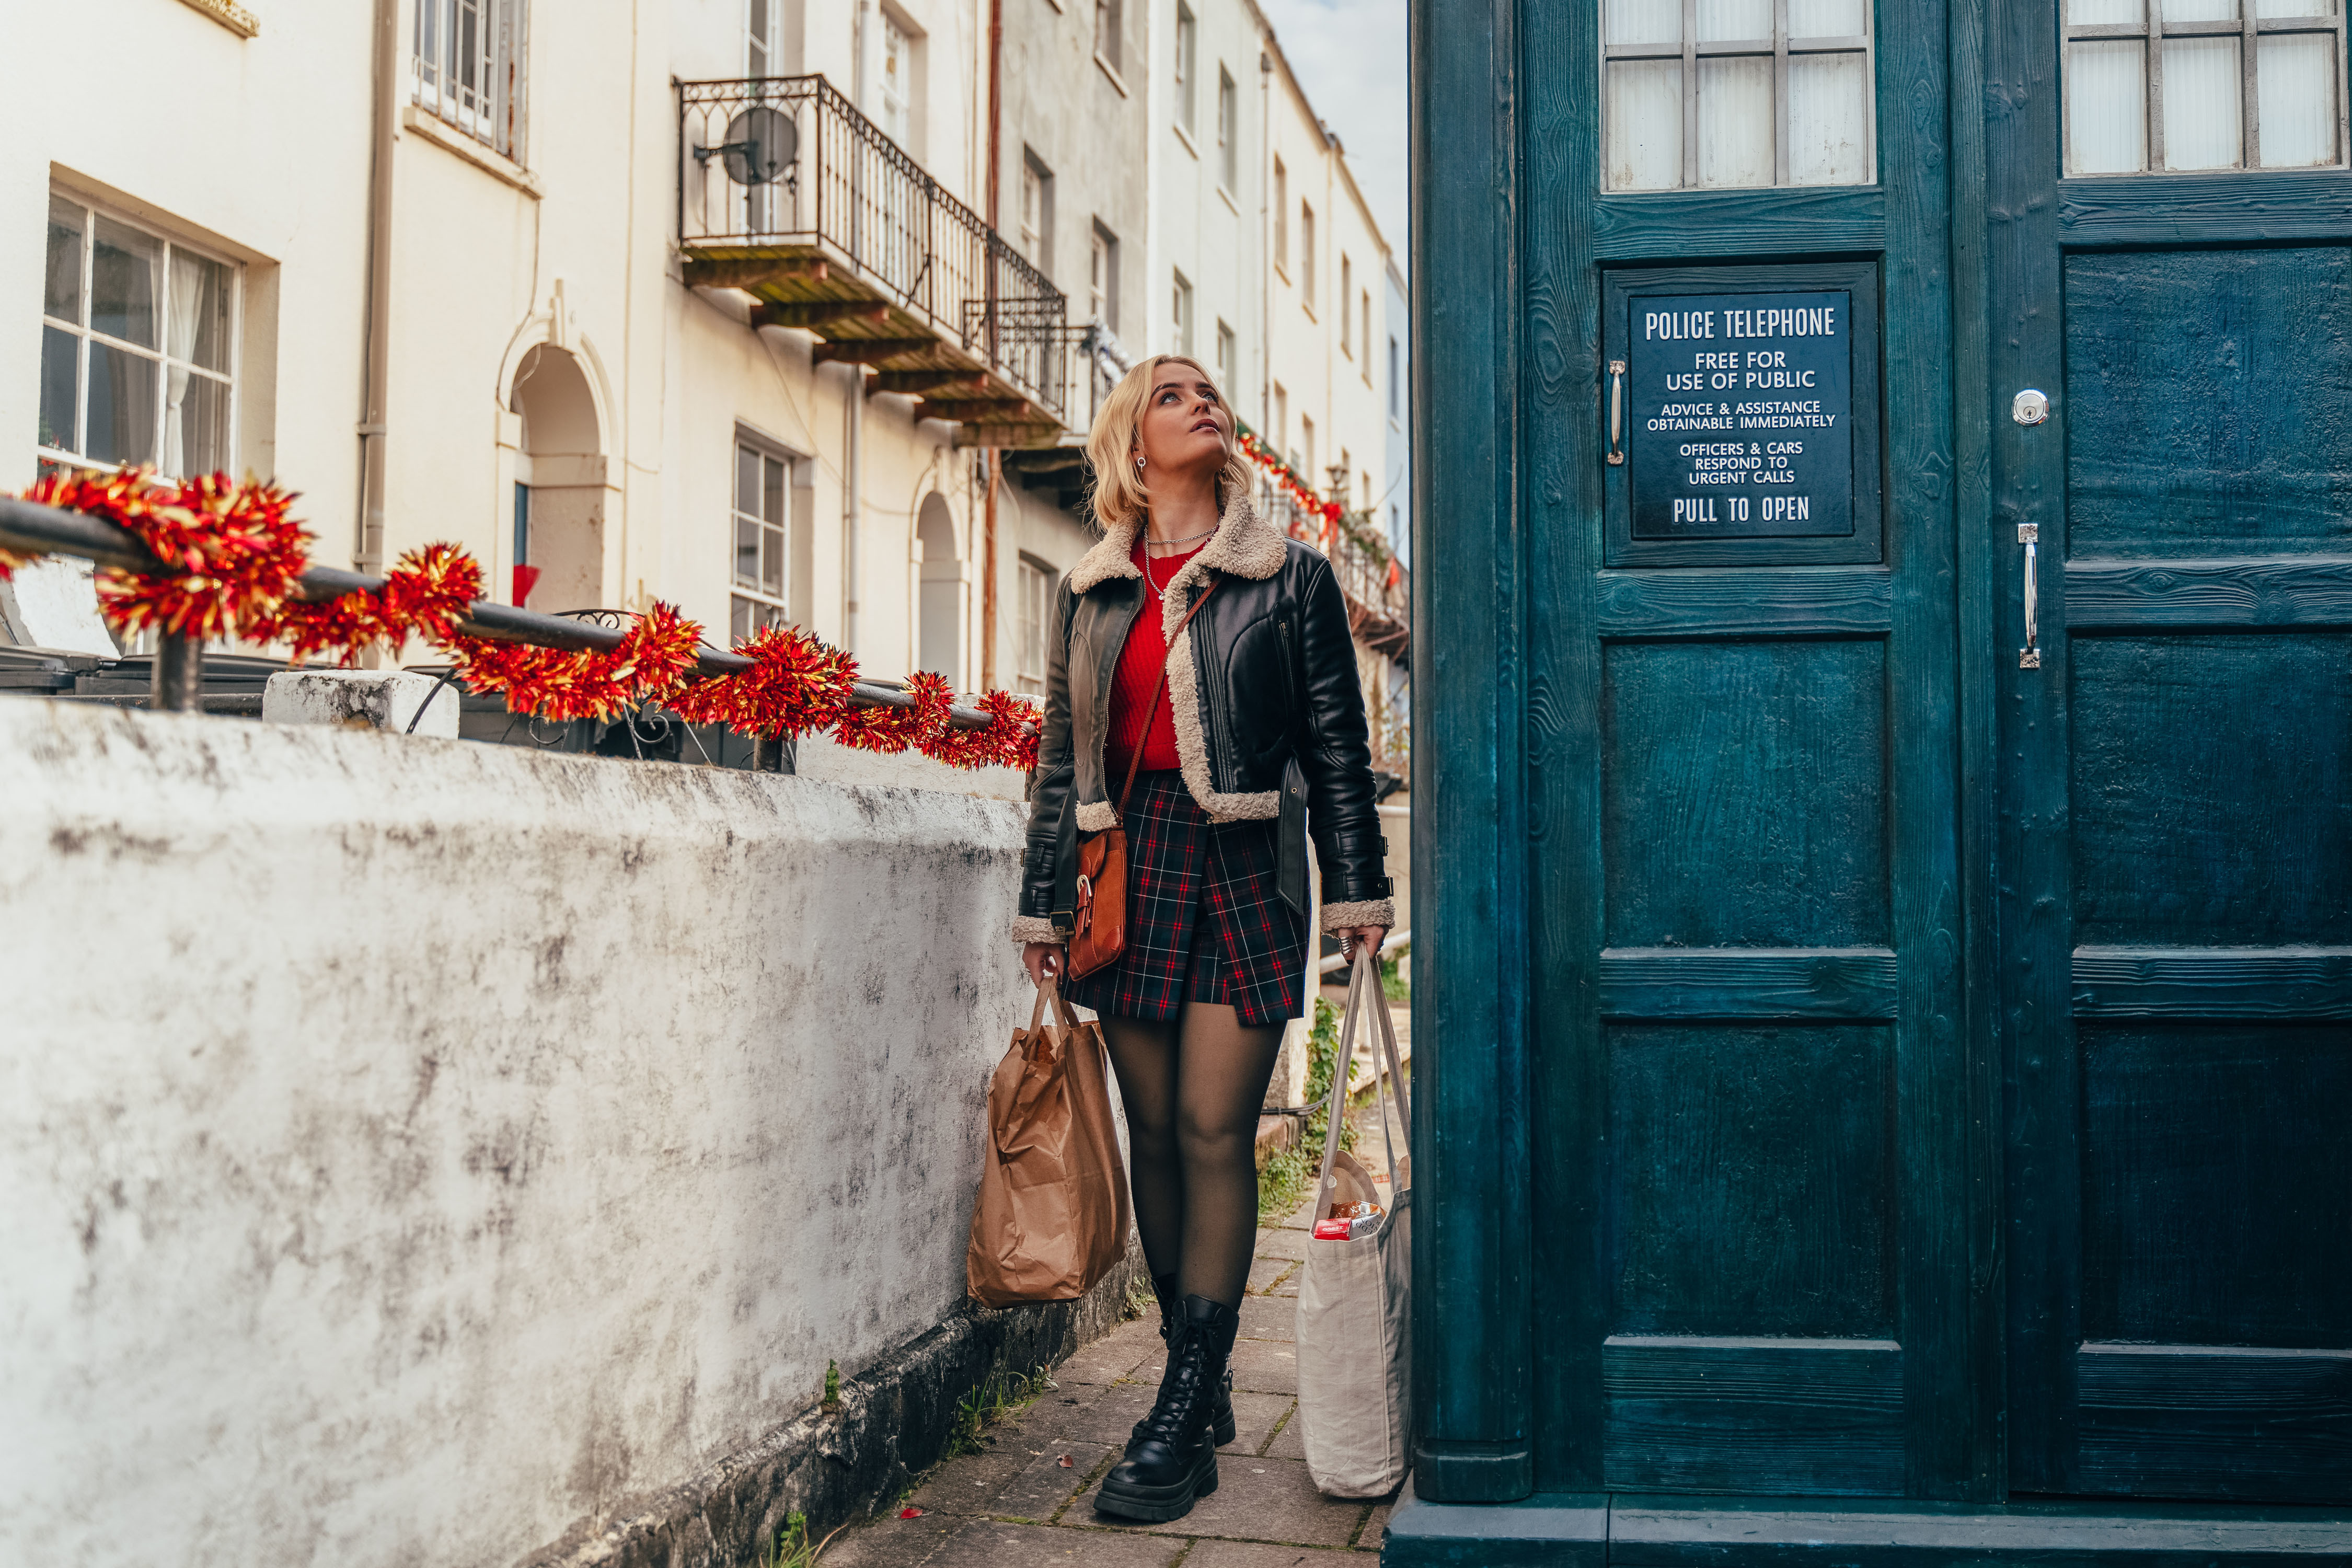 Ruby Sunday (Millie Gibson) is walking down a residential street carrying a bag of shopping in each hand. The Tardis is right next to her on the pavement and she is looking up at it with curiosity.